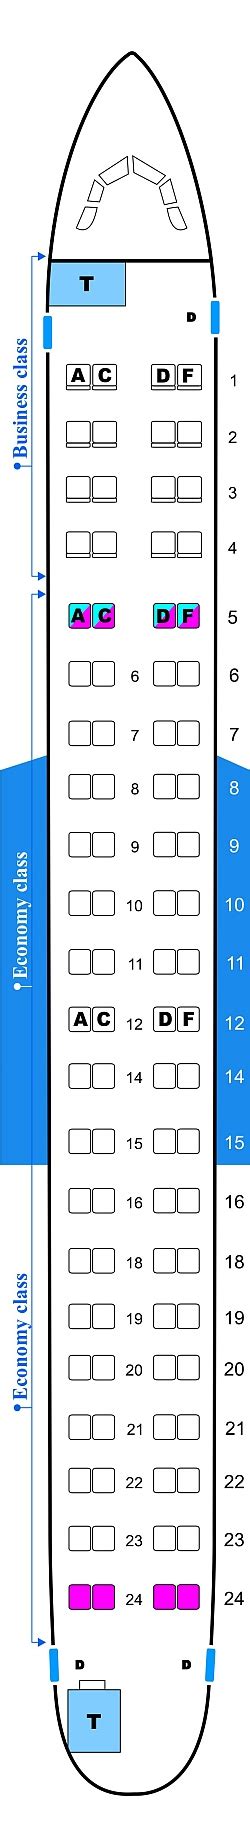 Airline Seating Charts Best Airplane Seats Seatmaestro Best